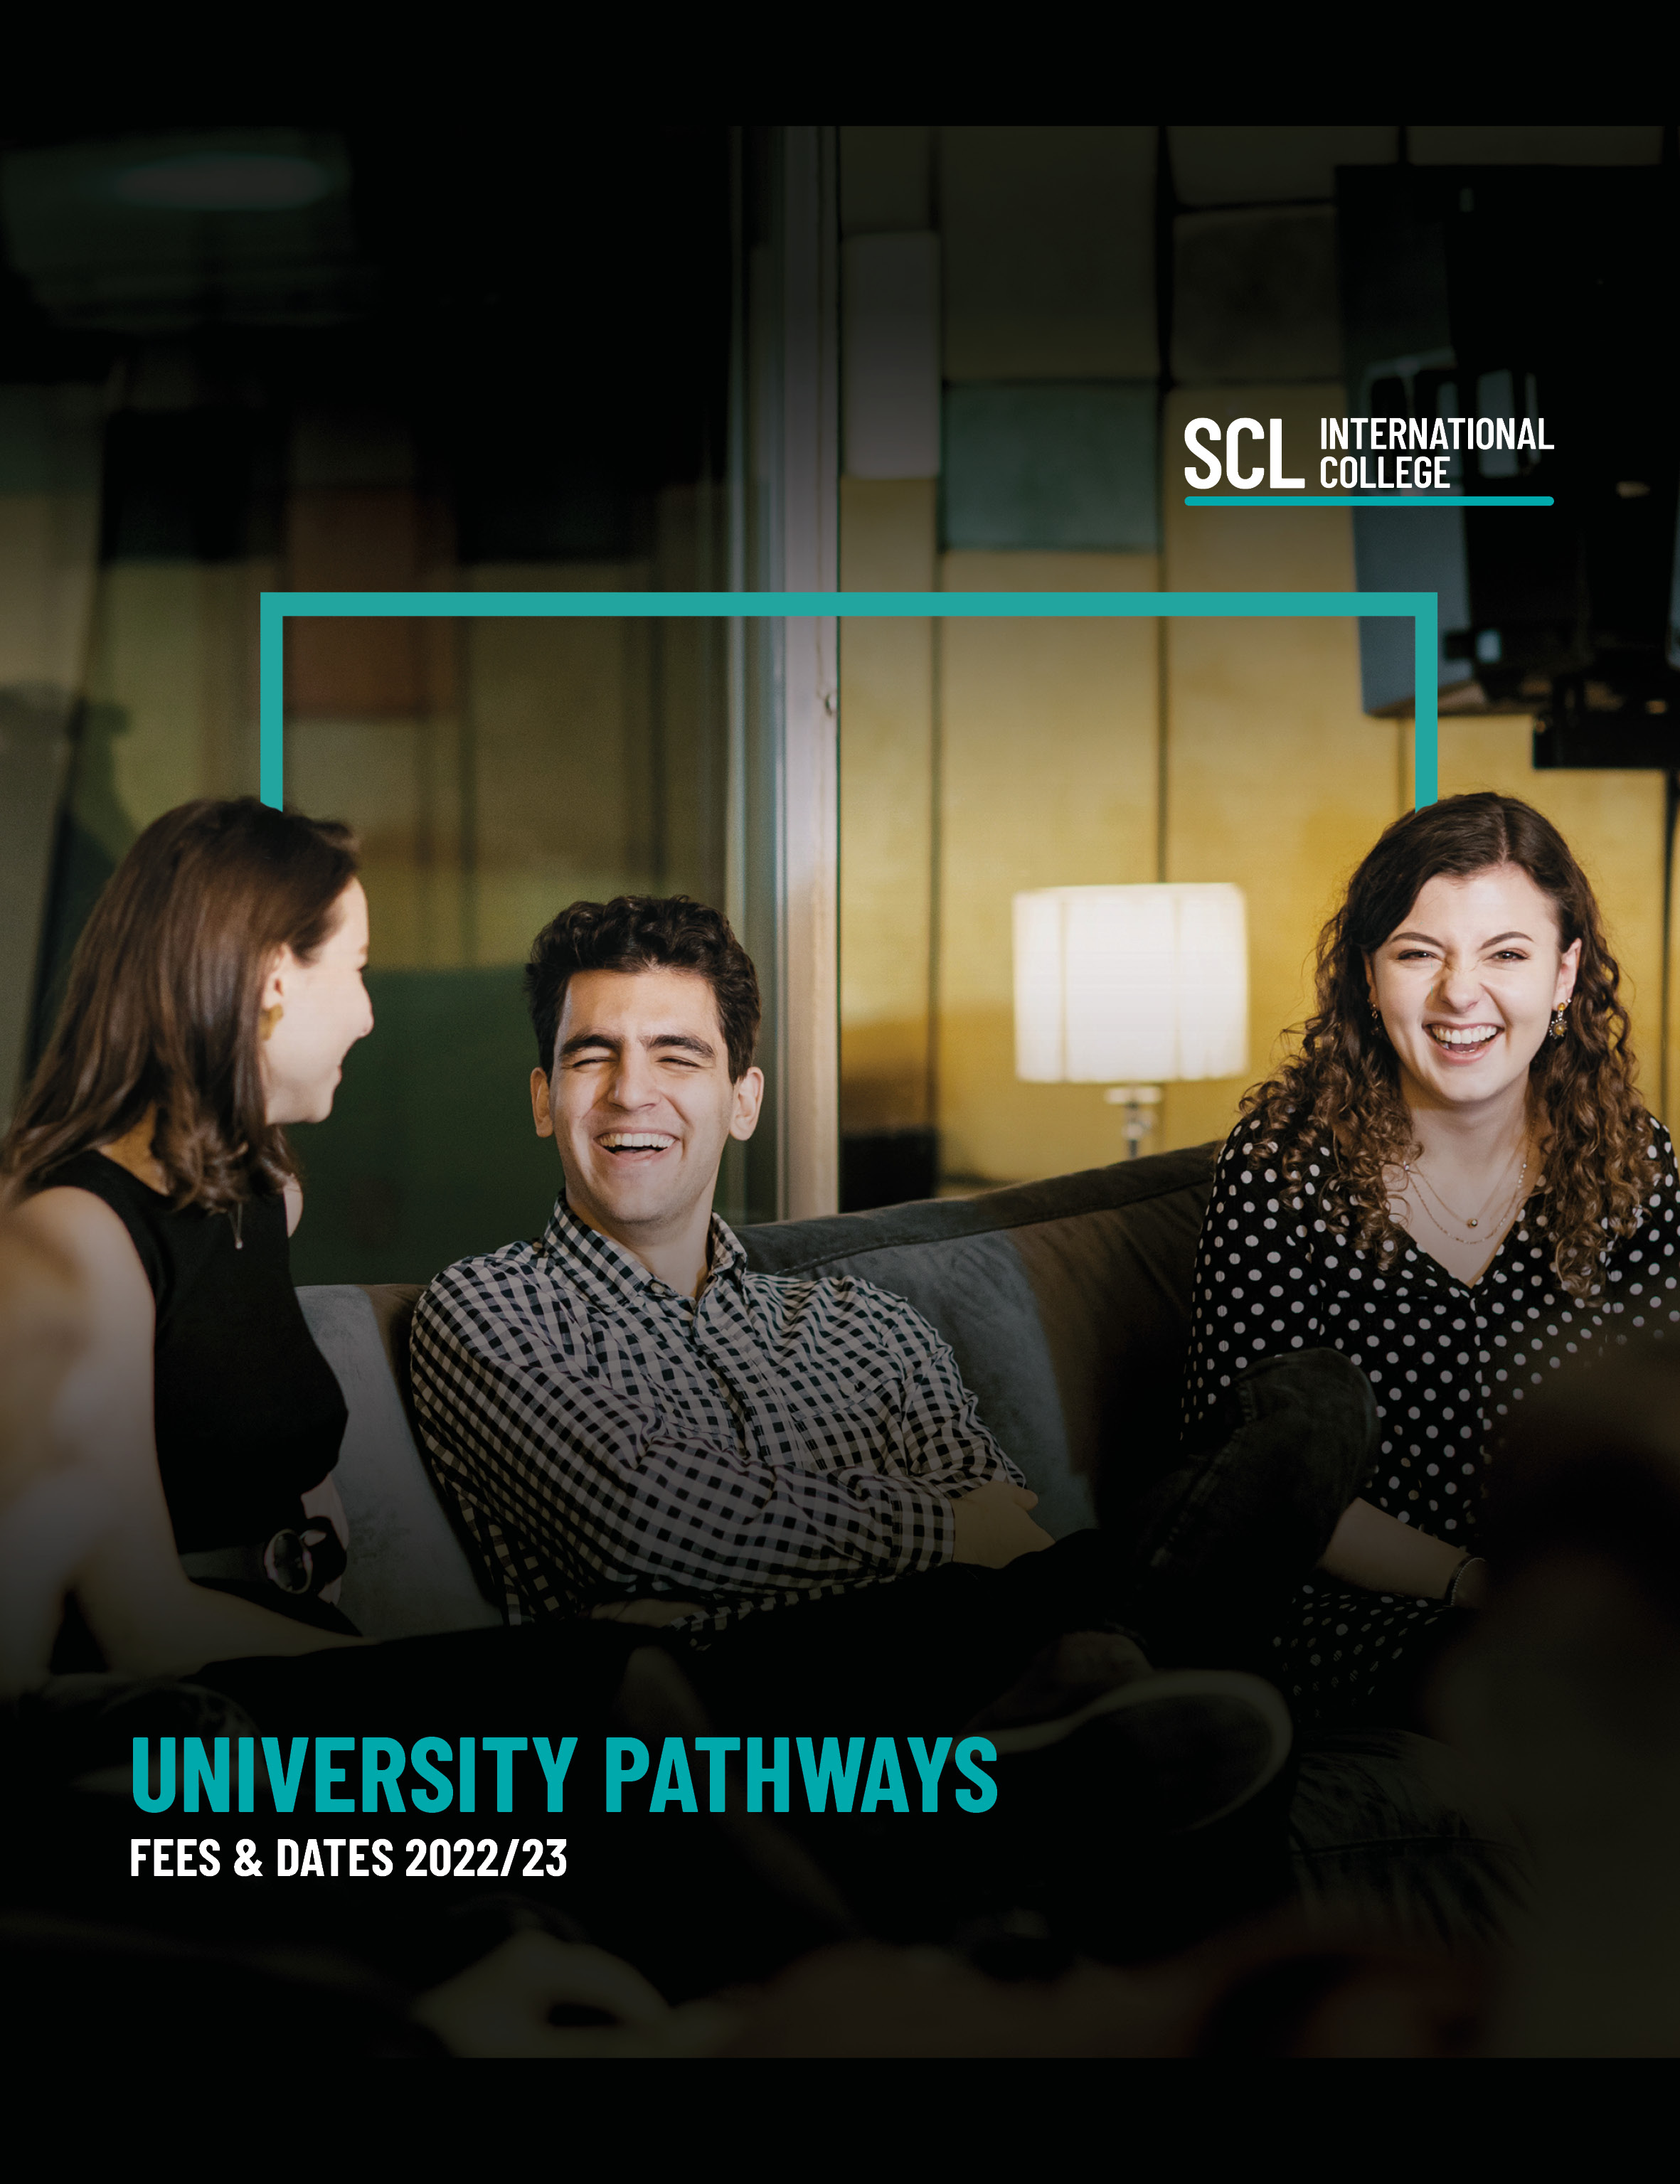 University-Pathways-Fees-Dates-2023-Cover-SCL-International-College